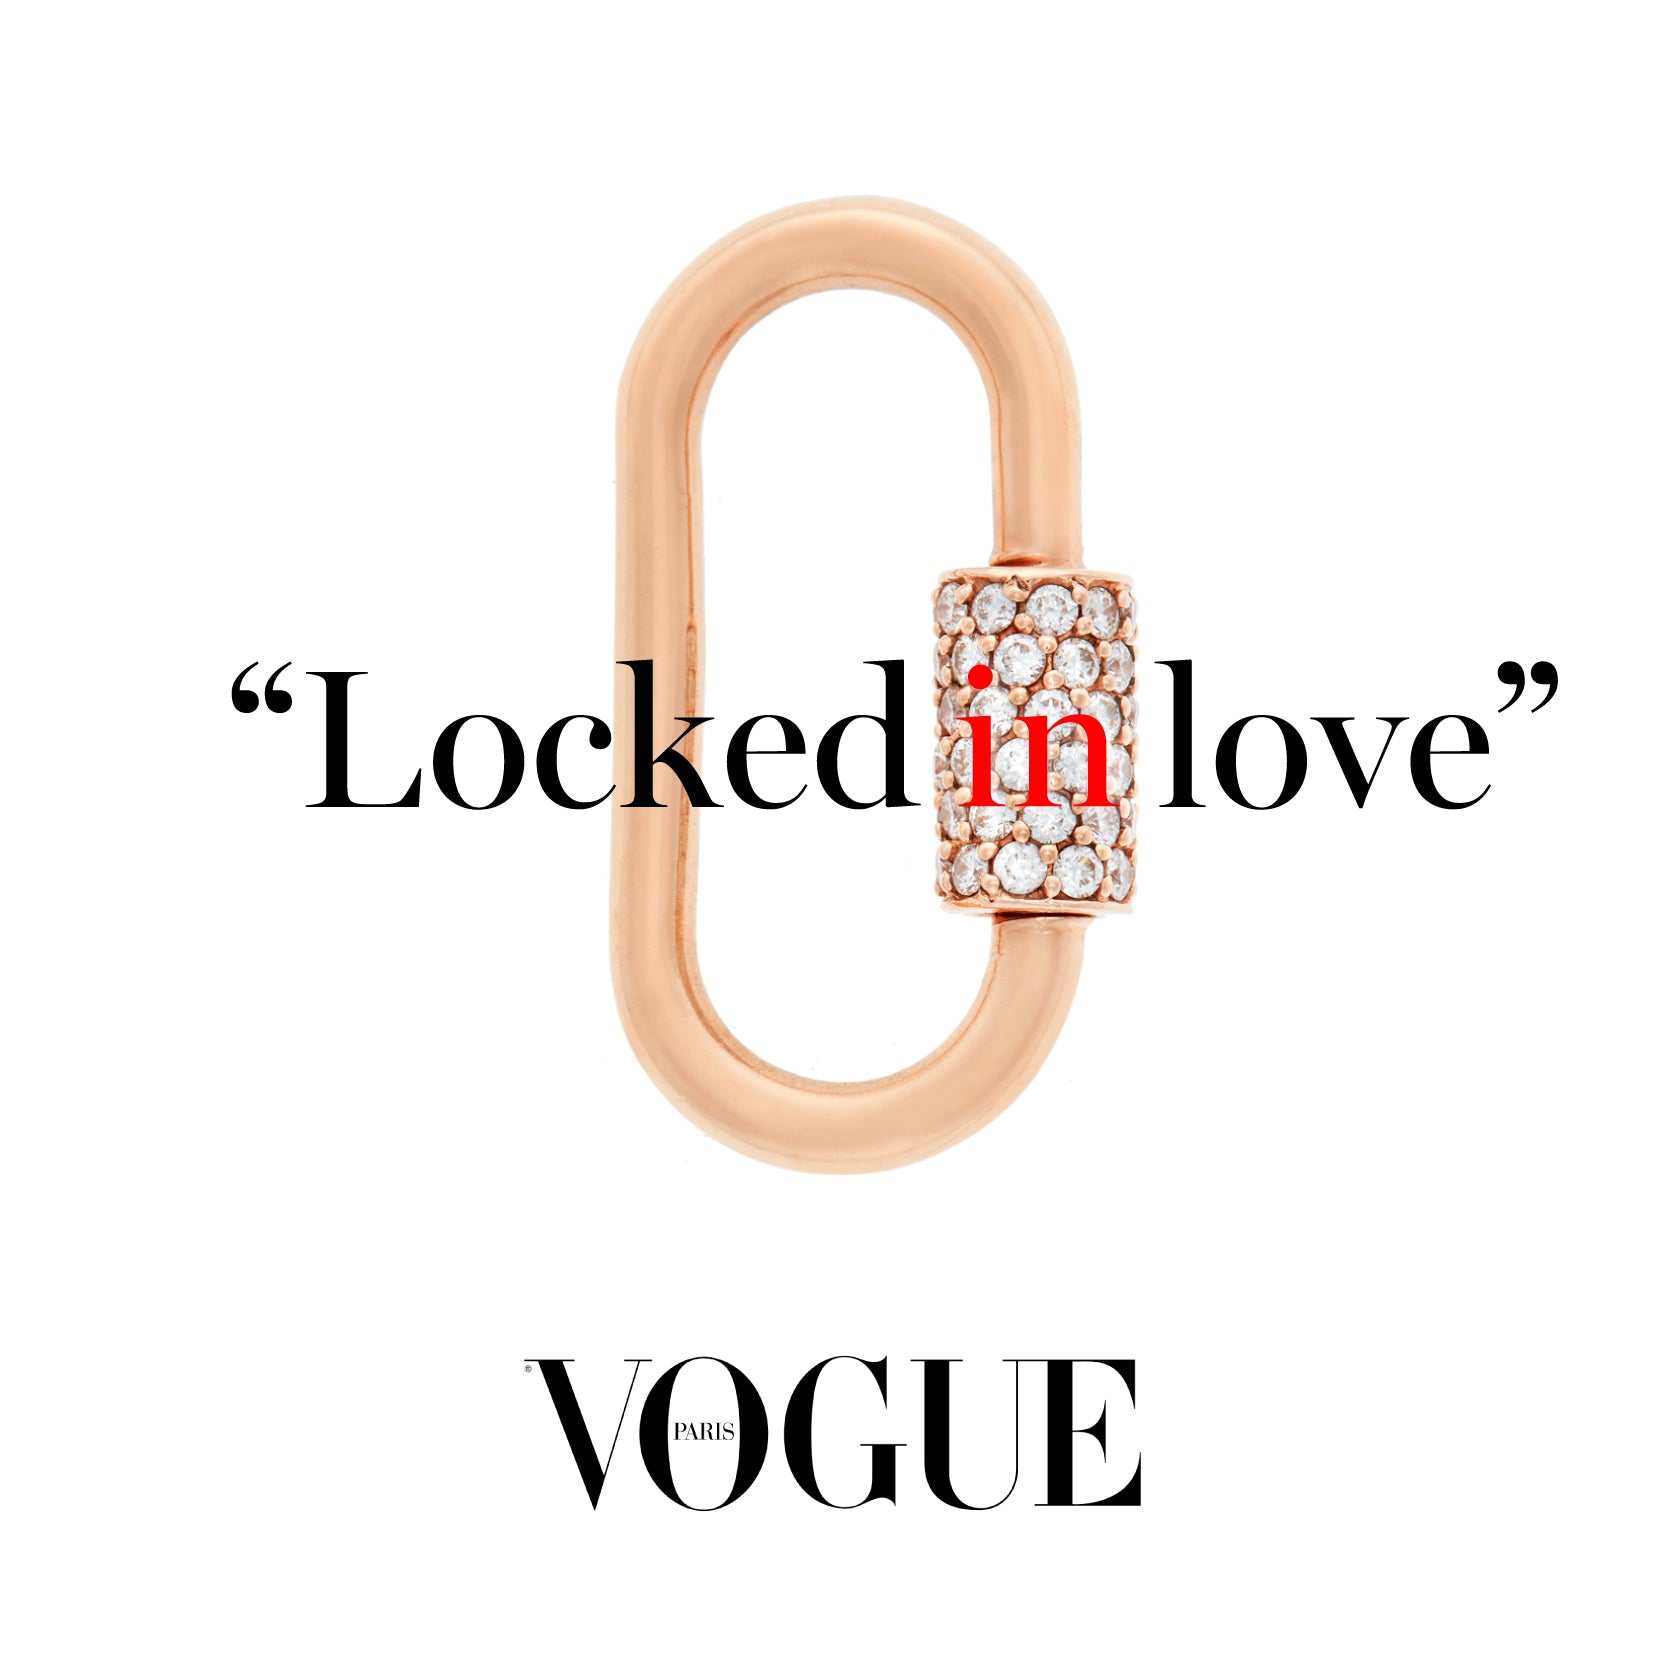 Locked in love: 12 jewelry pieces to seal your engagement a little differently